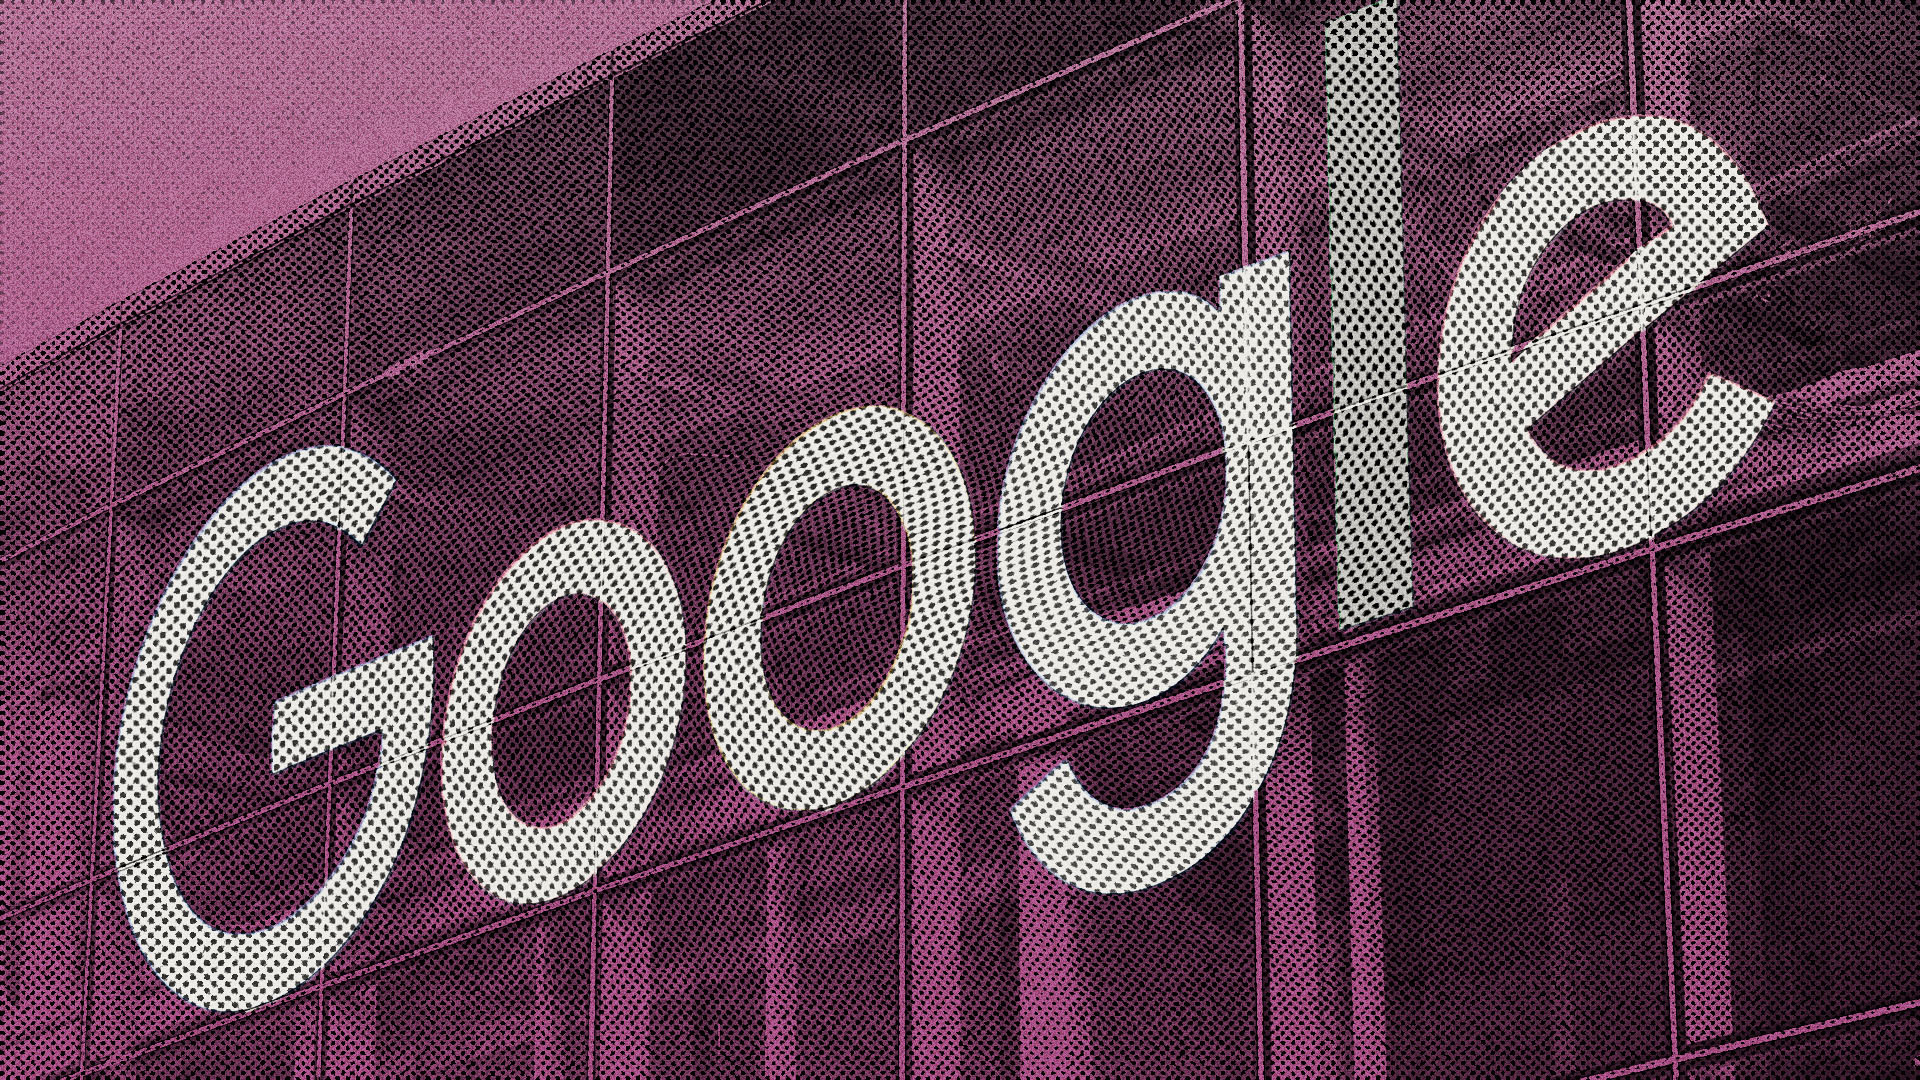 Google delays cookie deprecation again. Now what?